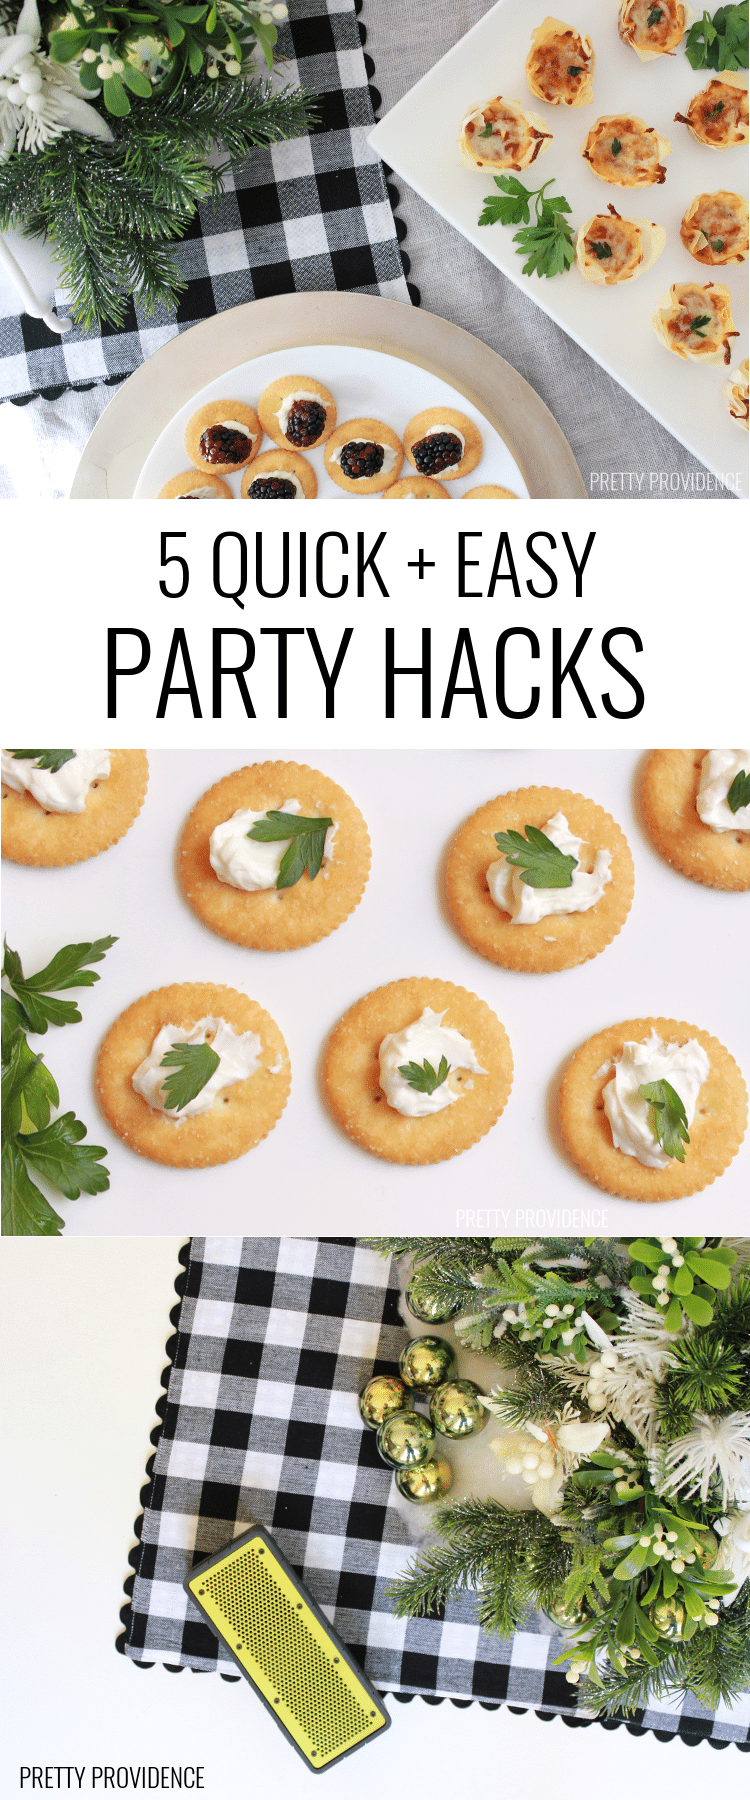 5 easy party hacks to throwing the perfect party! These save so much time and money! 